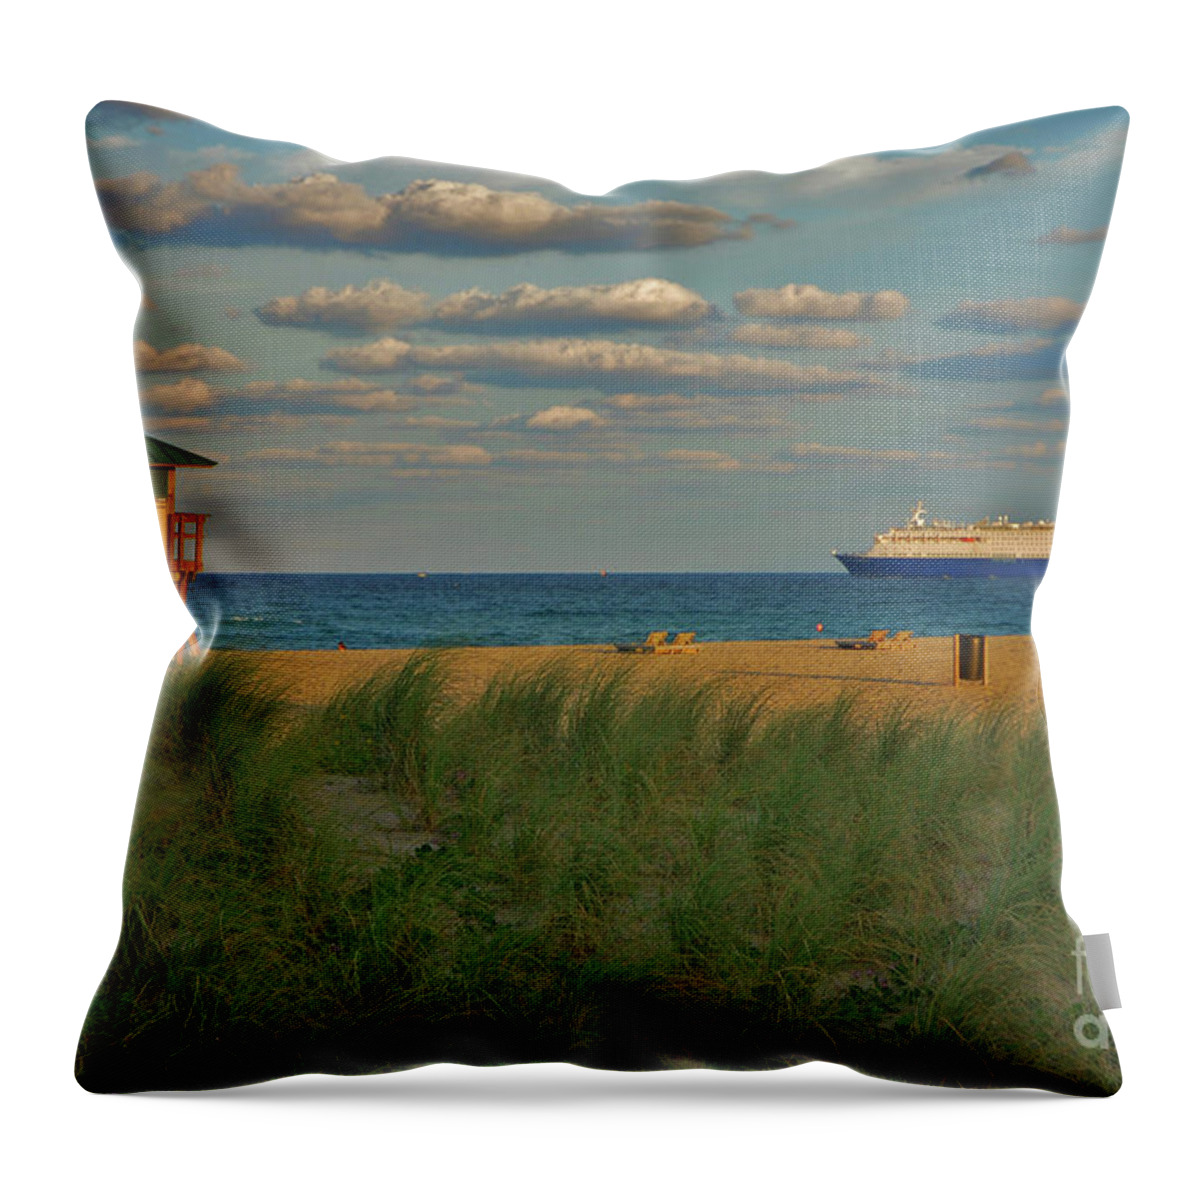 Bahamas Celebration Throw Pillow featuring the photograph 13- Cruising In Paradise by Joseph Keane